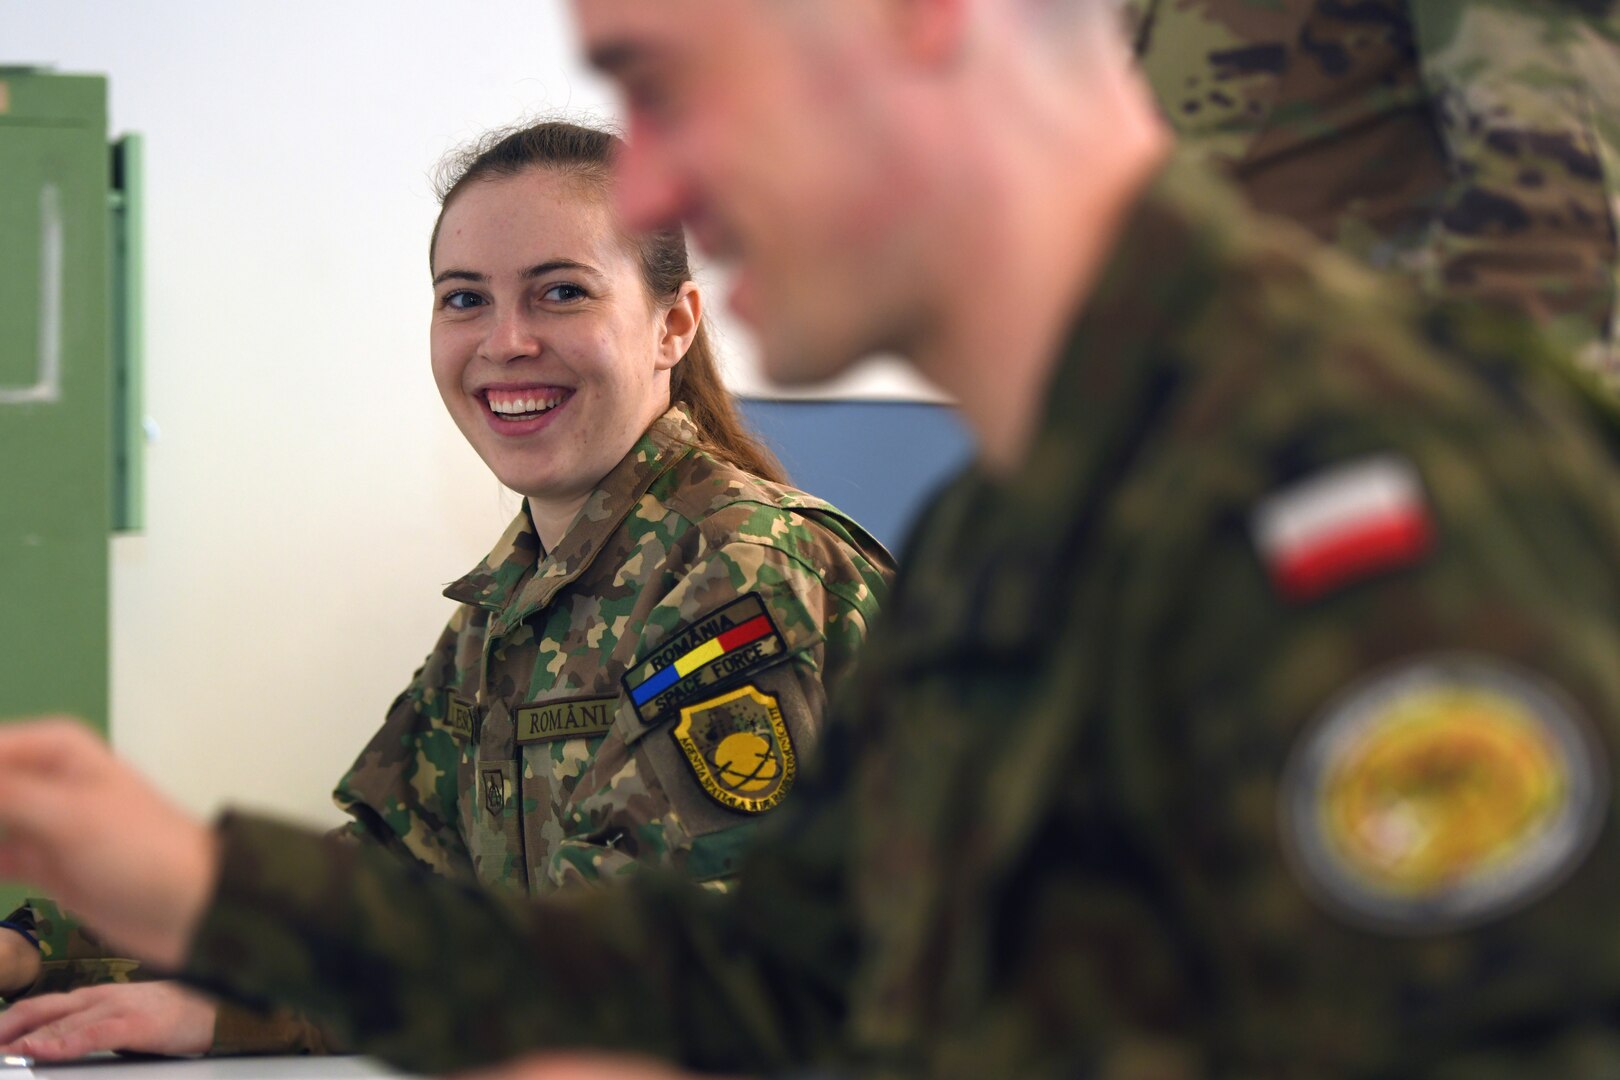 Army 2nd Lt. Emilia Patrulescu, a space operations officer with the Romanian Military Space and Radio Communications Agency, shares a laugh with Army 1st Lt. Norbert Cwalinski, a section chief with the Polish Armed Forces’ 22nd Military Cartographic Center, during the Joint Commercial Operations phase at Vulcan Guard Bolt 6, Ramstein Air Base, Germany, March 27, 2024. The space-focused exercise, now in its sixth iteration, is an Air National Guard-led event that seeks to integrate operations, intelligence and cyber personnel from across all seven Guard space states and NATO partners, incorporating several diverse space weapons systems in a realistic threat-based scenario.